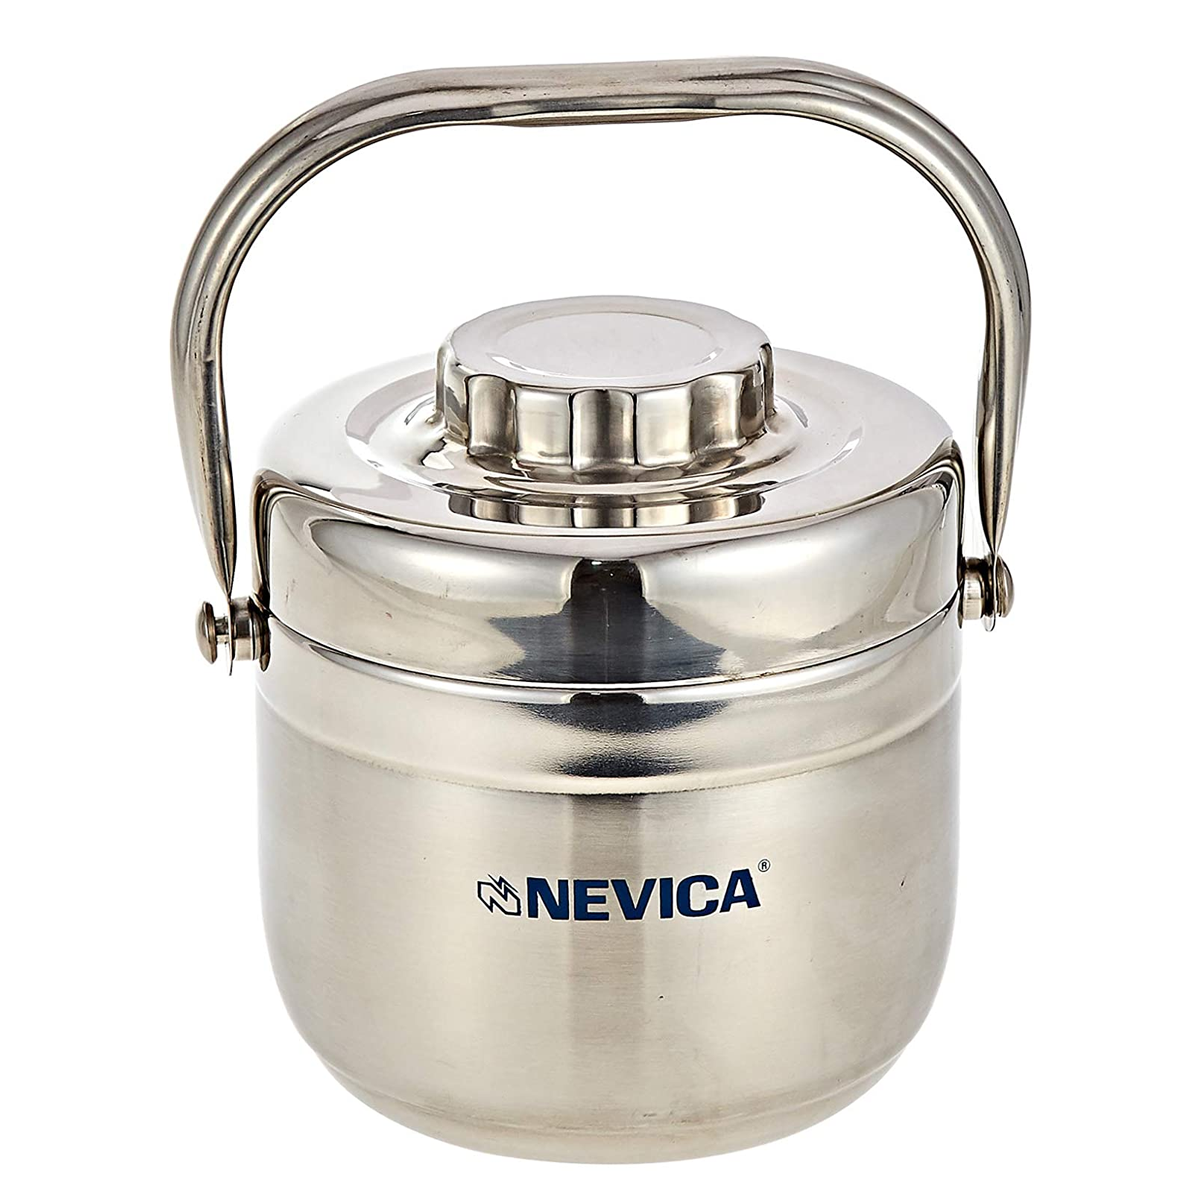 Nevica 188 ml Stainless Steel Plain Food Container - Silver